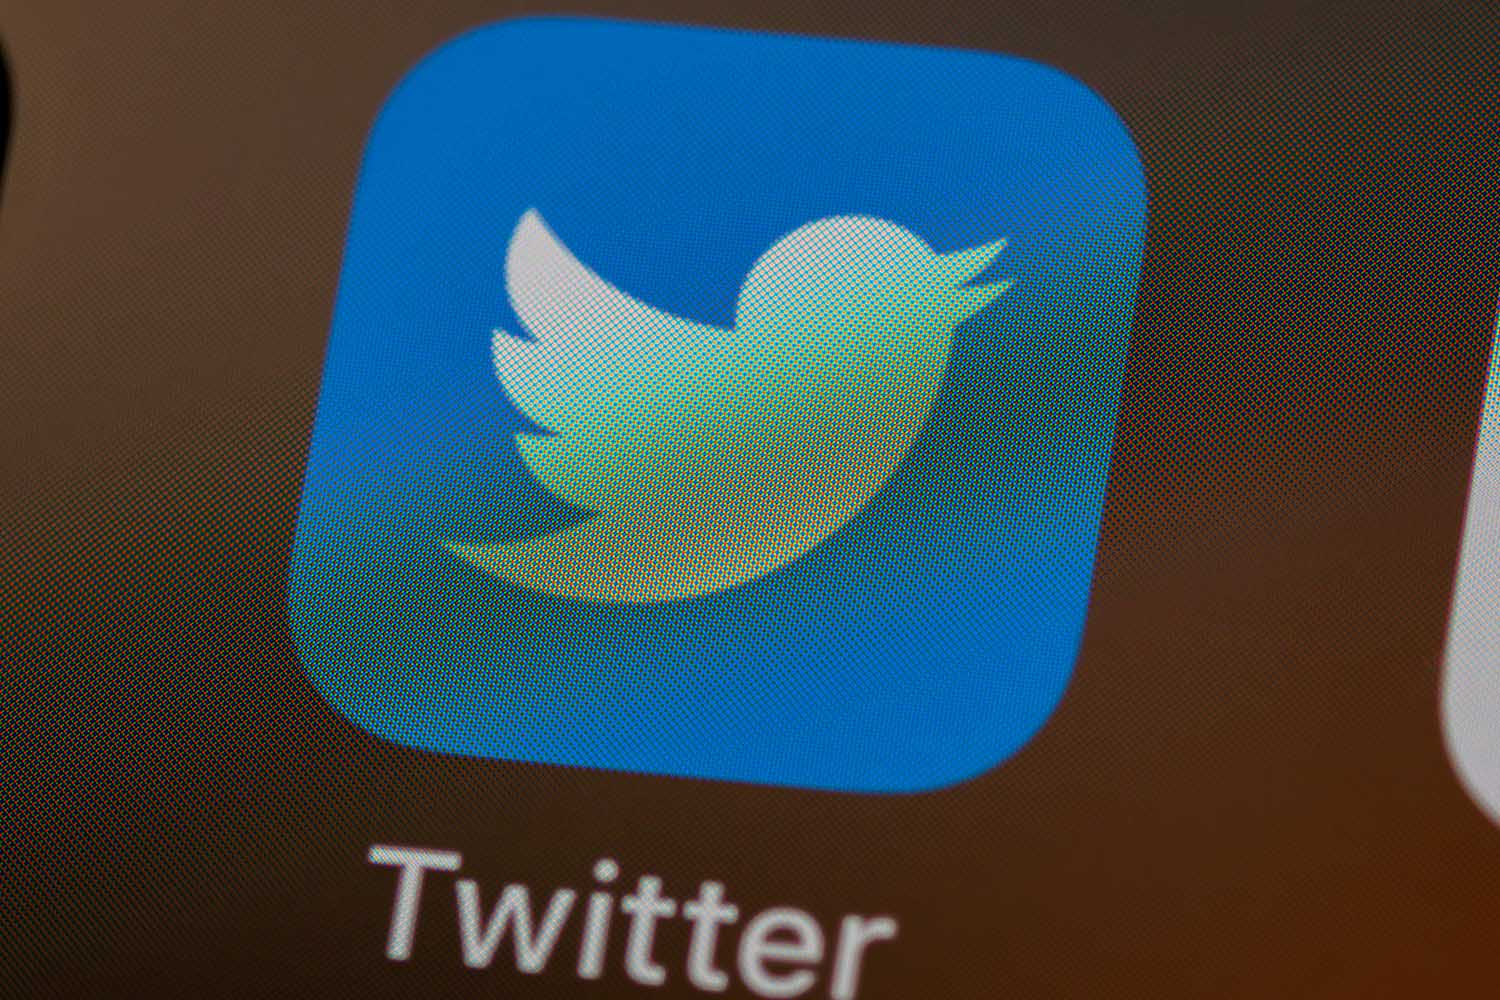 Twitter Expands Testing of Reddit-Style Downvote Feature Globally